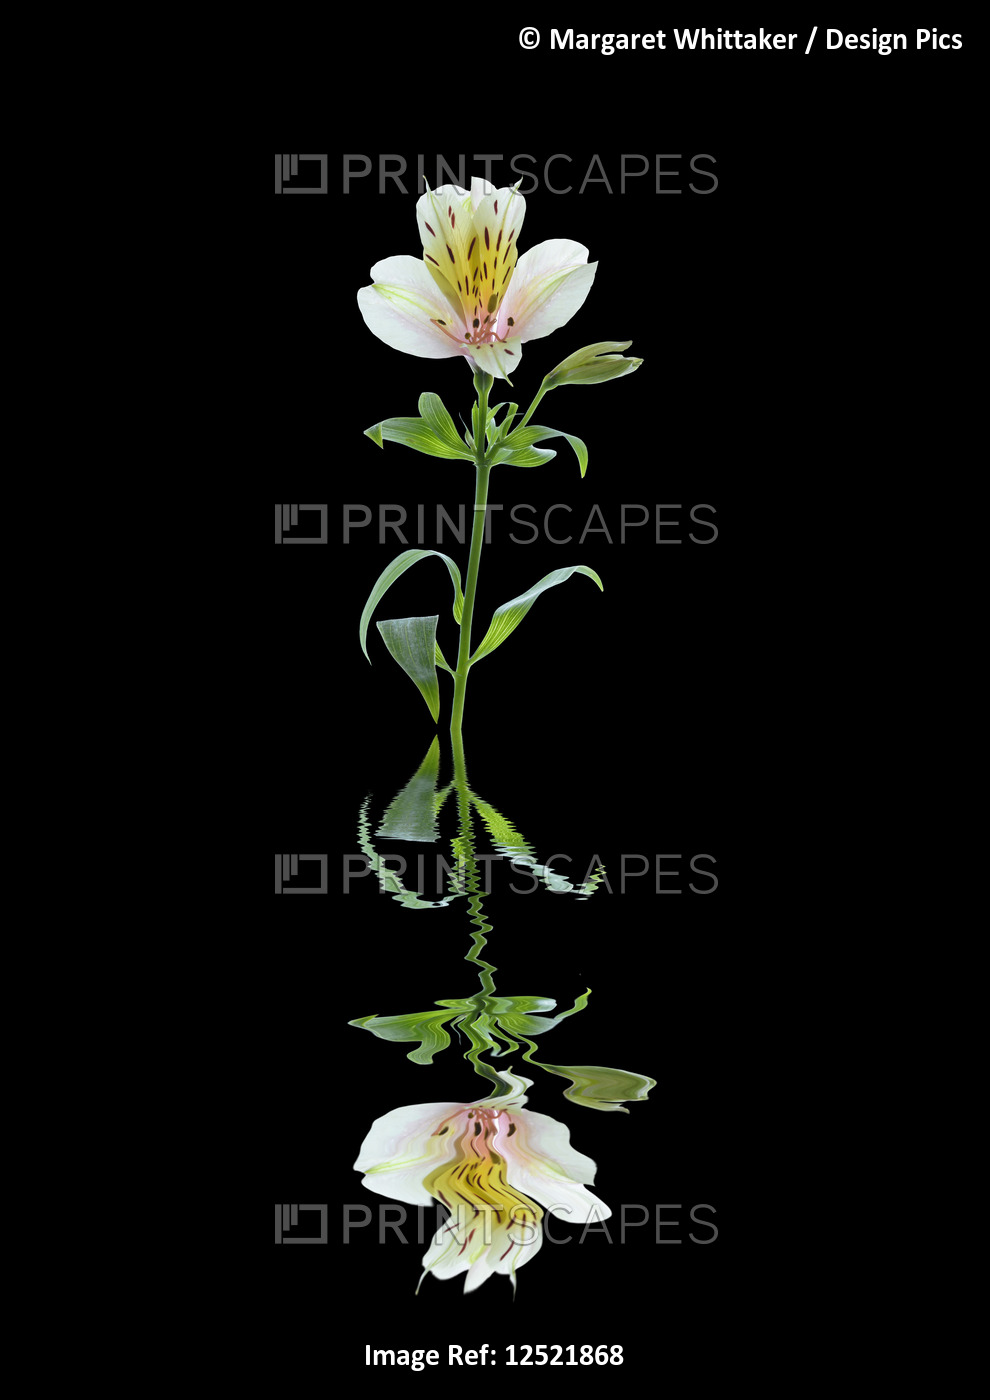 Art image of a flower Alstroemeria reflected in water